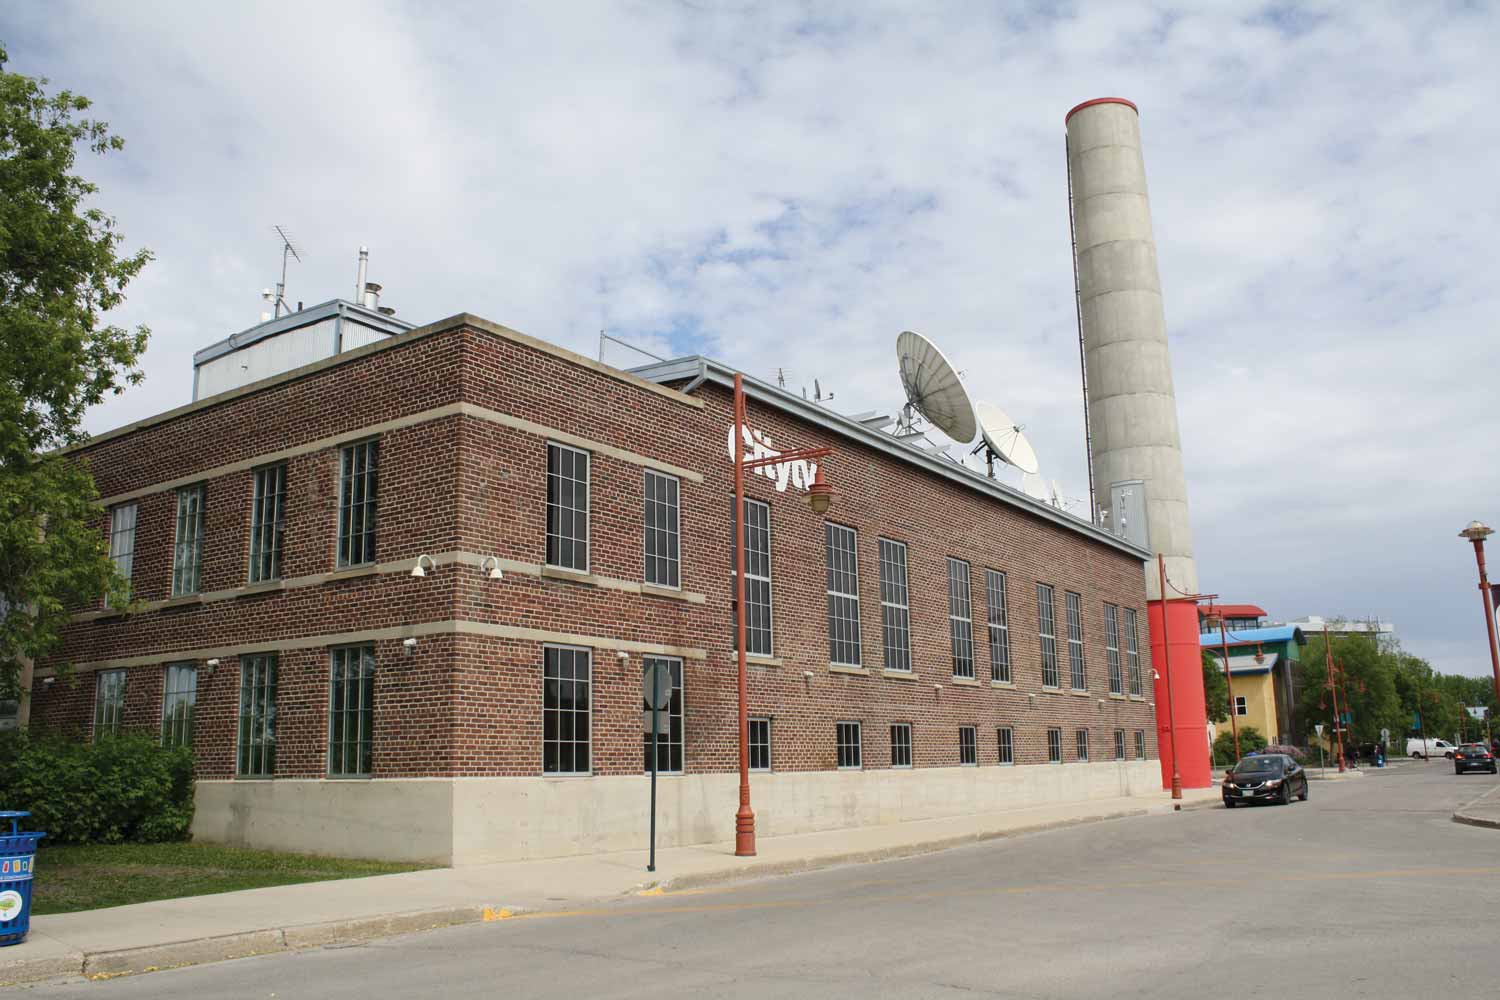 The CityTV building on a summer day. It is built of brown brick, with a red and grey smoke stack behind it.